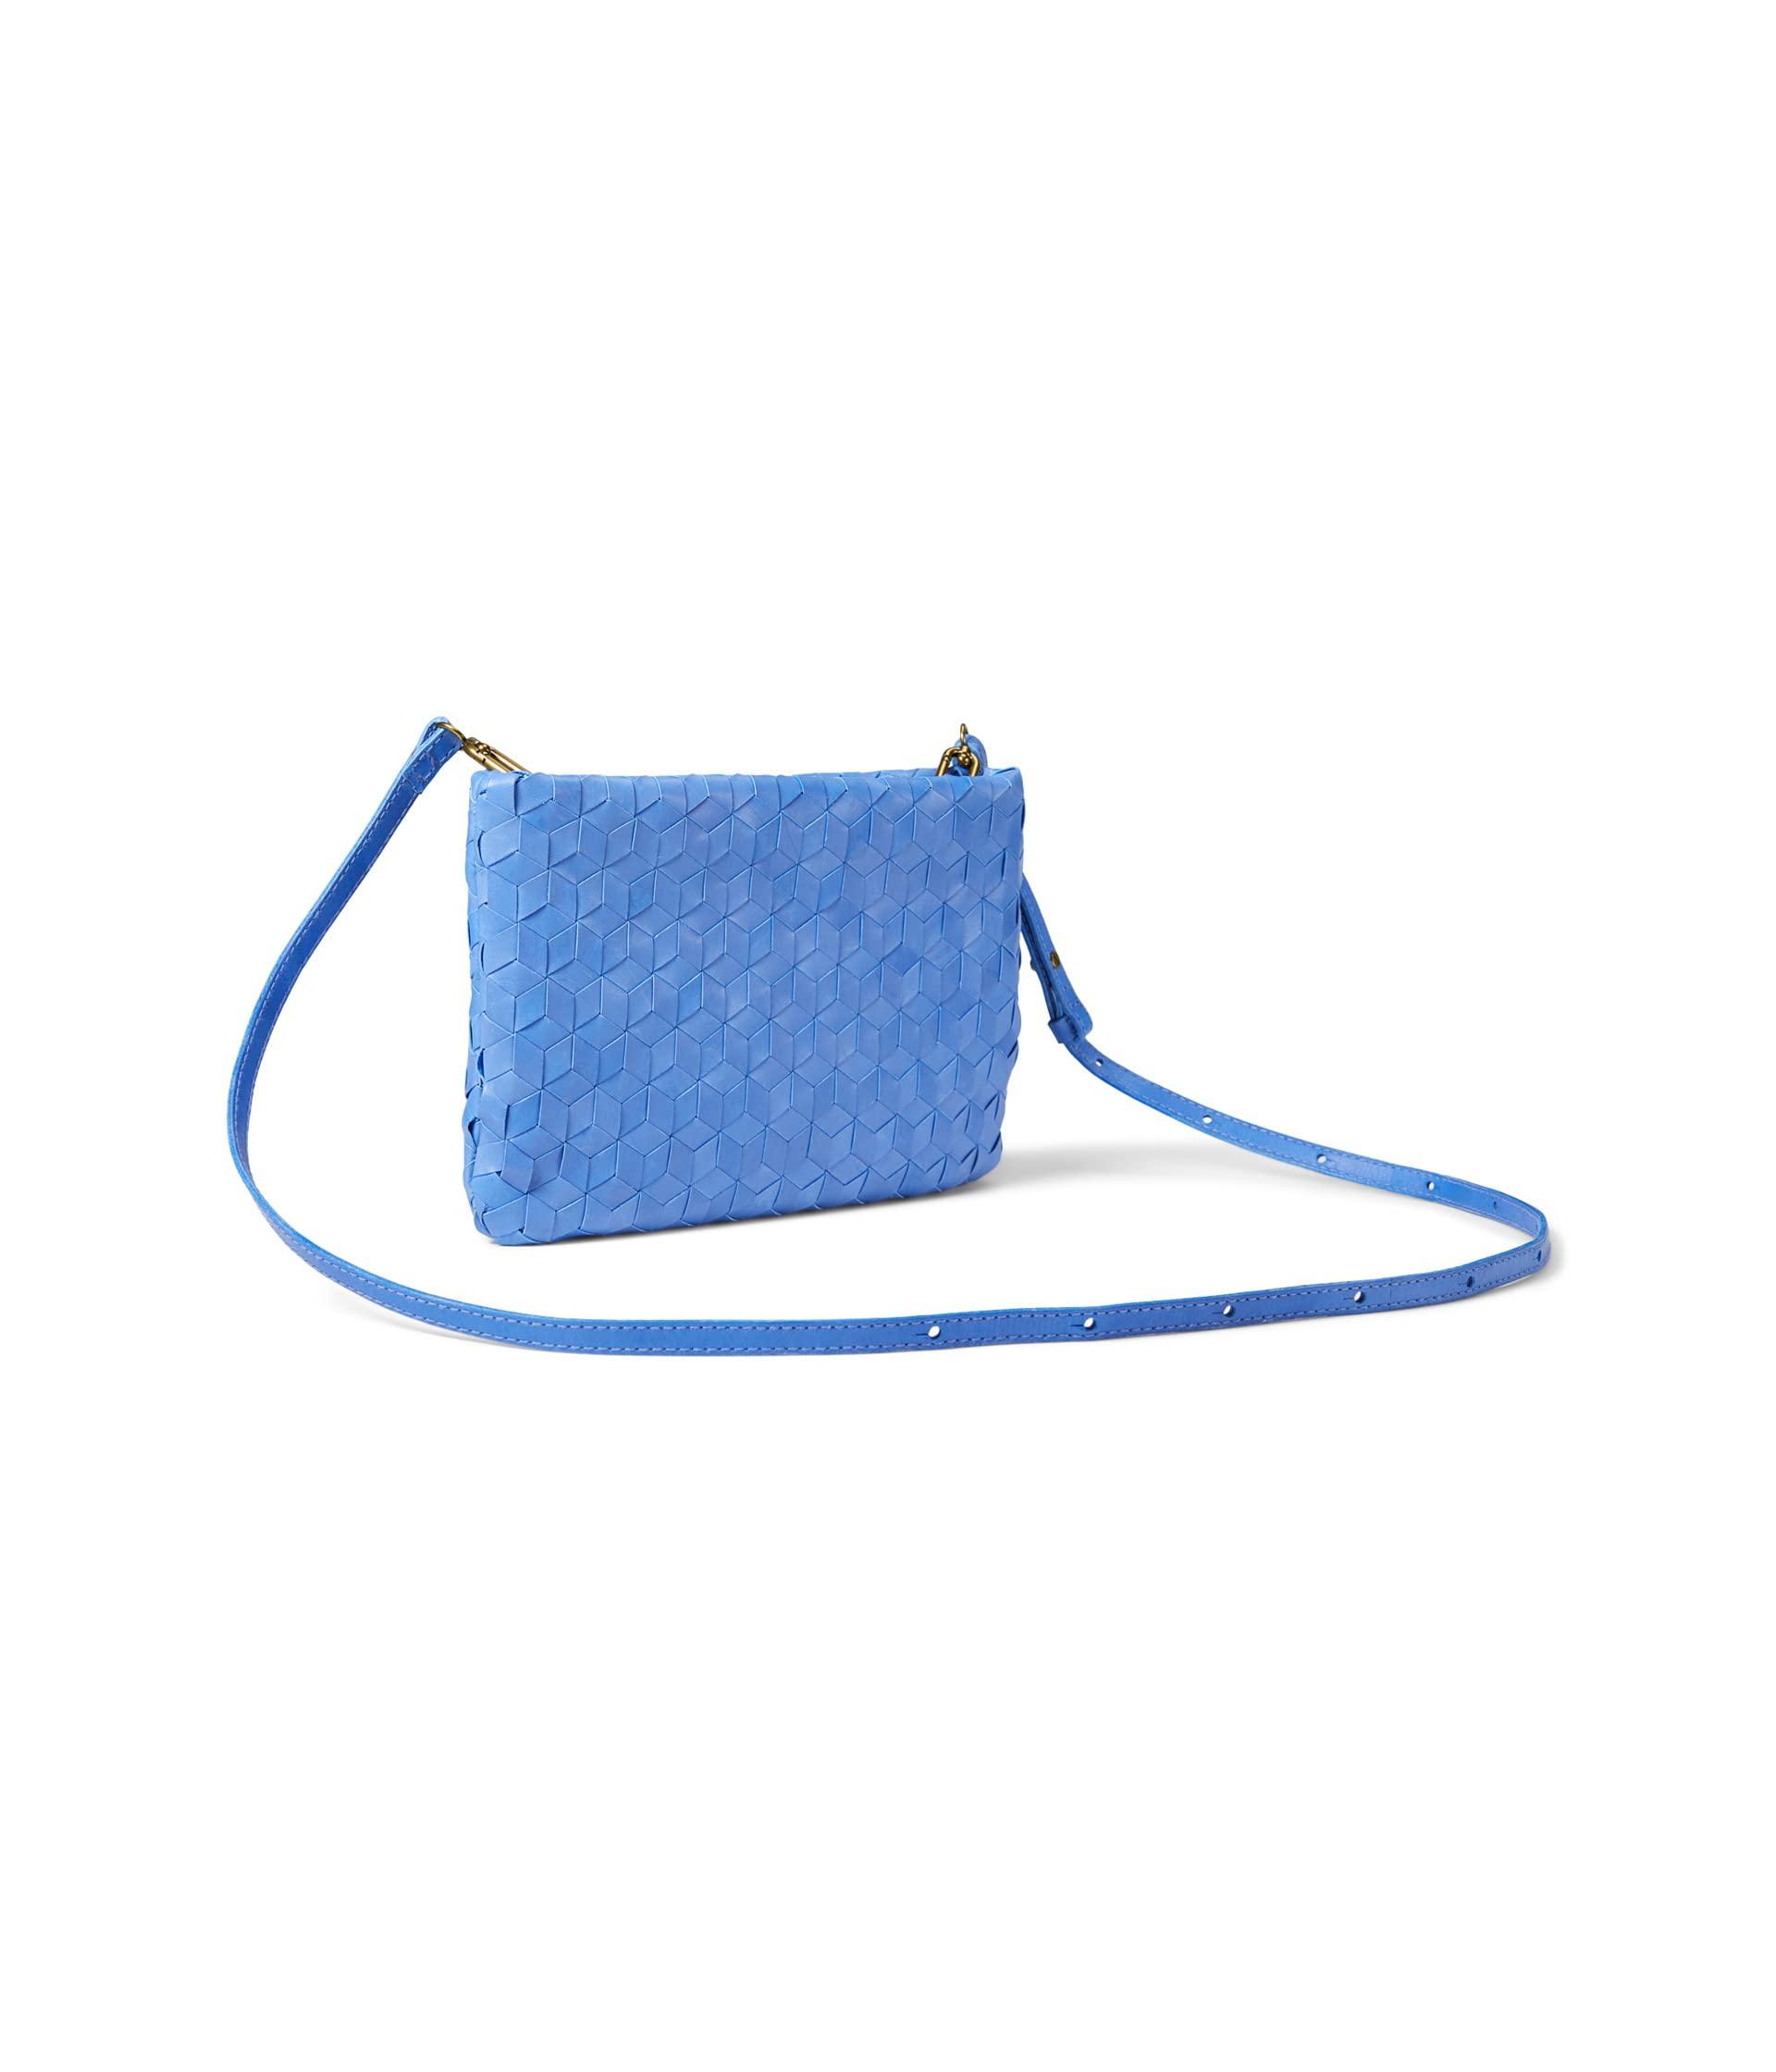 The Puff Crossbody Bag: Woven Leather Edition